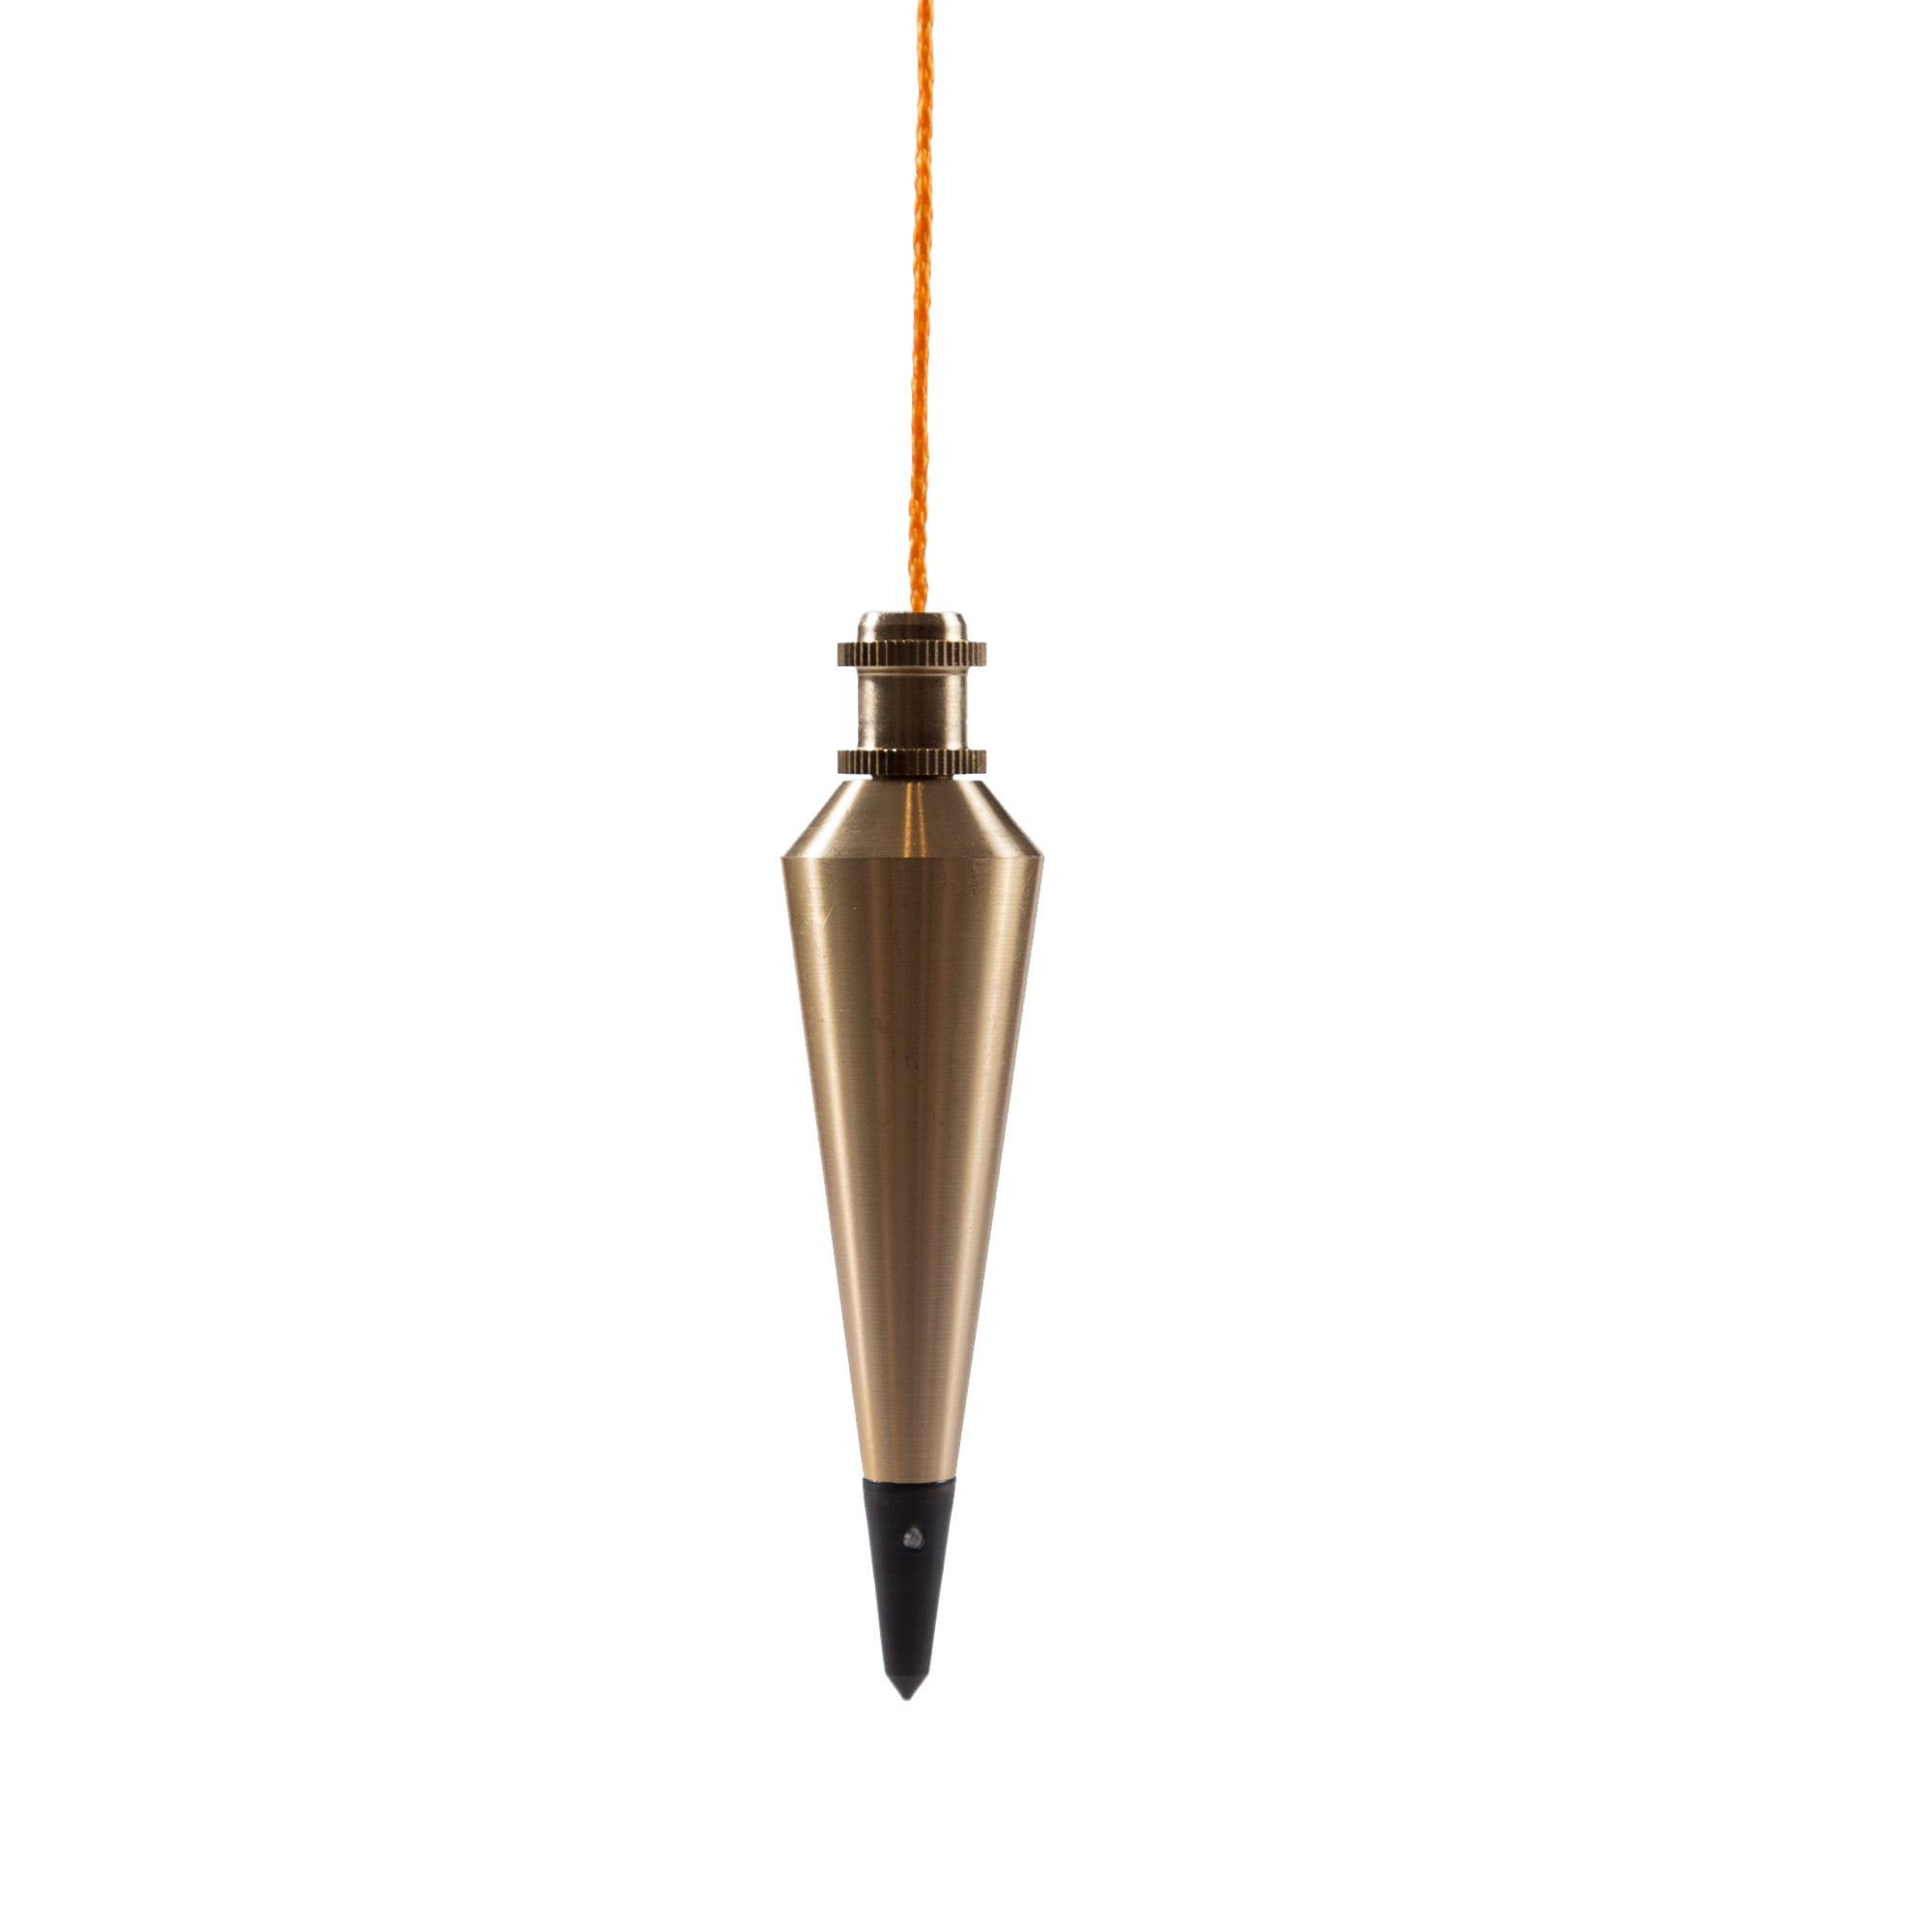 Swanson Tool Co 8-Ounce Brass Plumb Bob with 20' String Line and Hook  Included, Model PB008B 